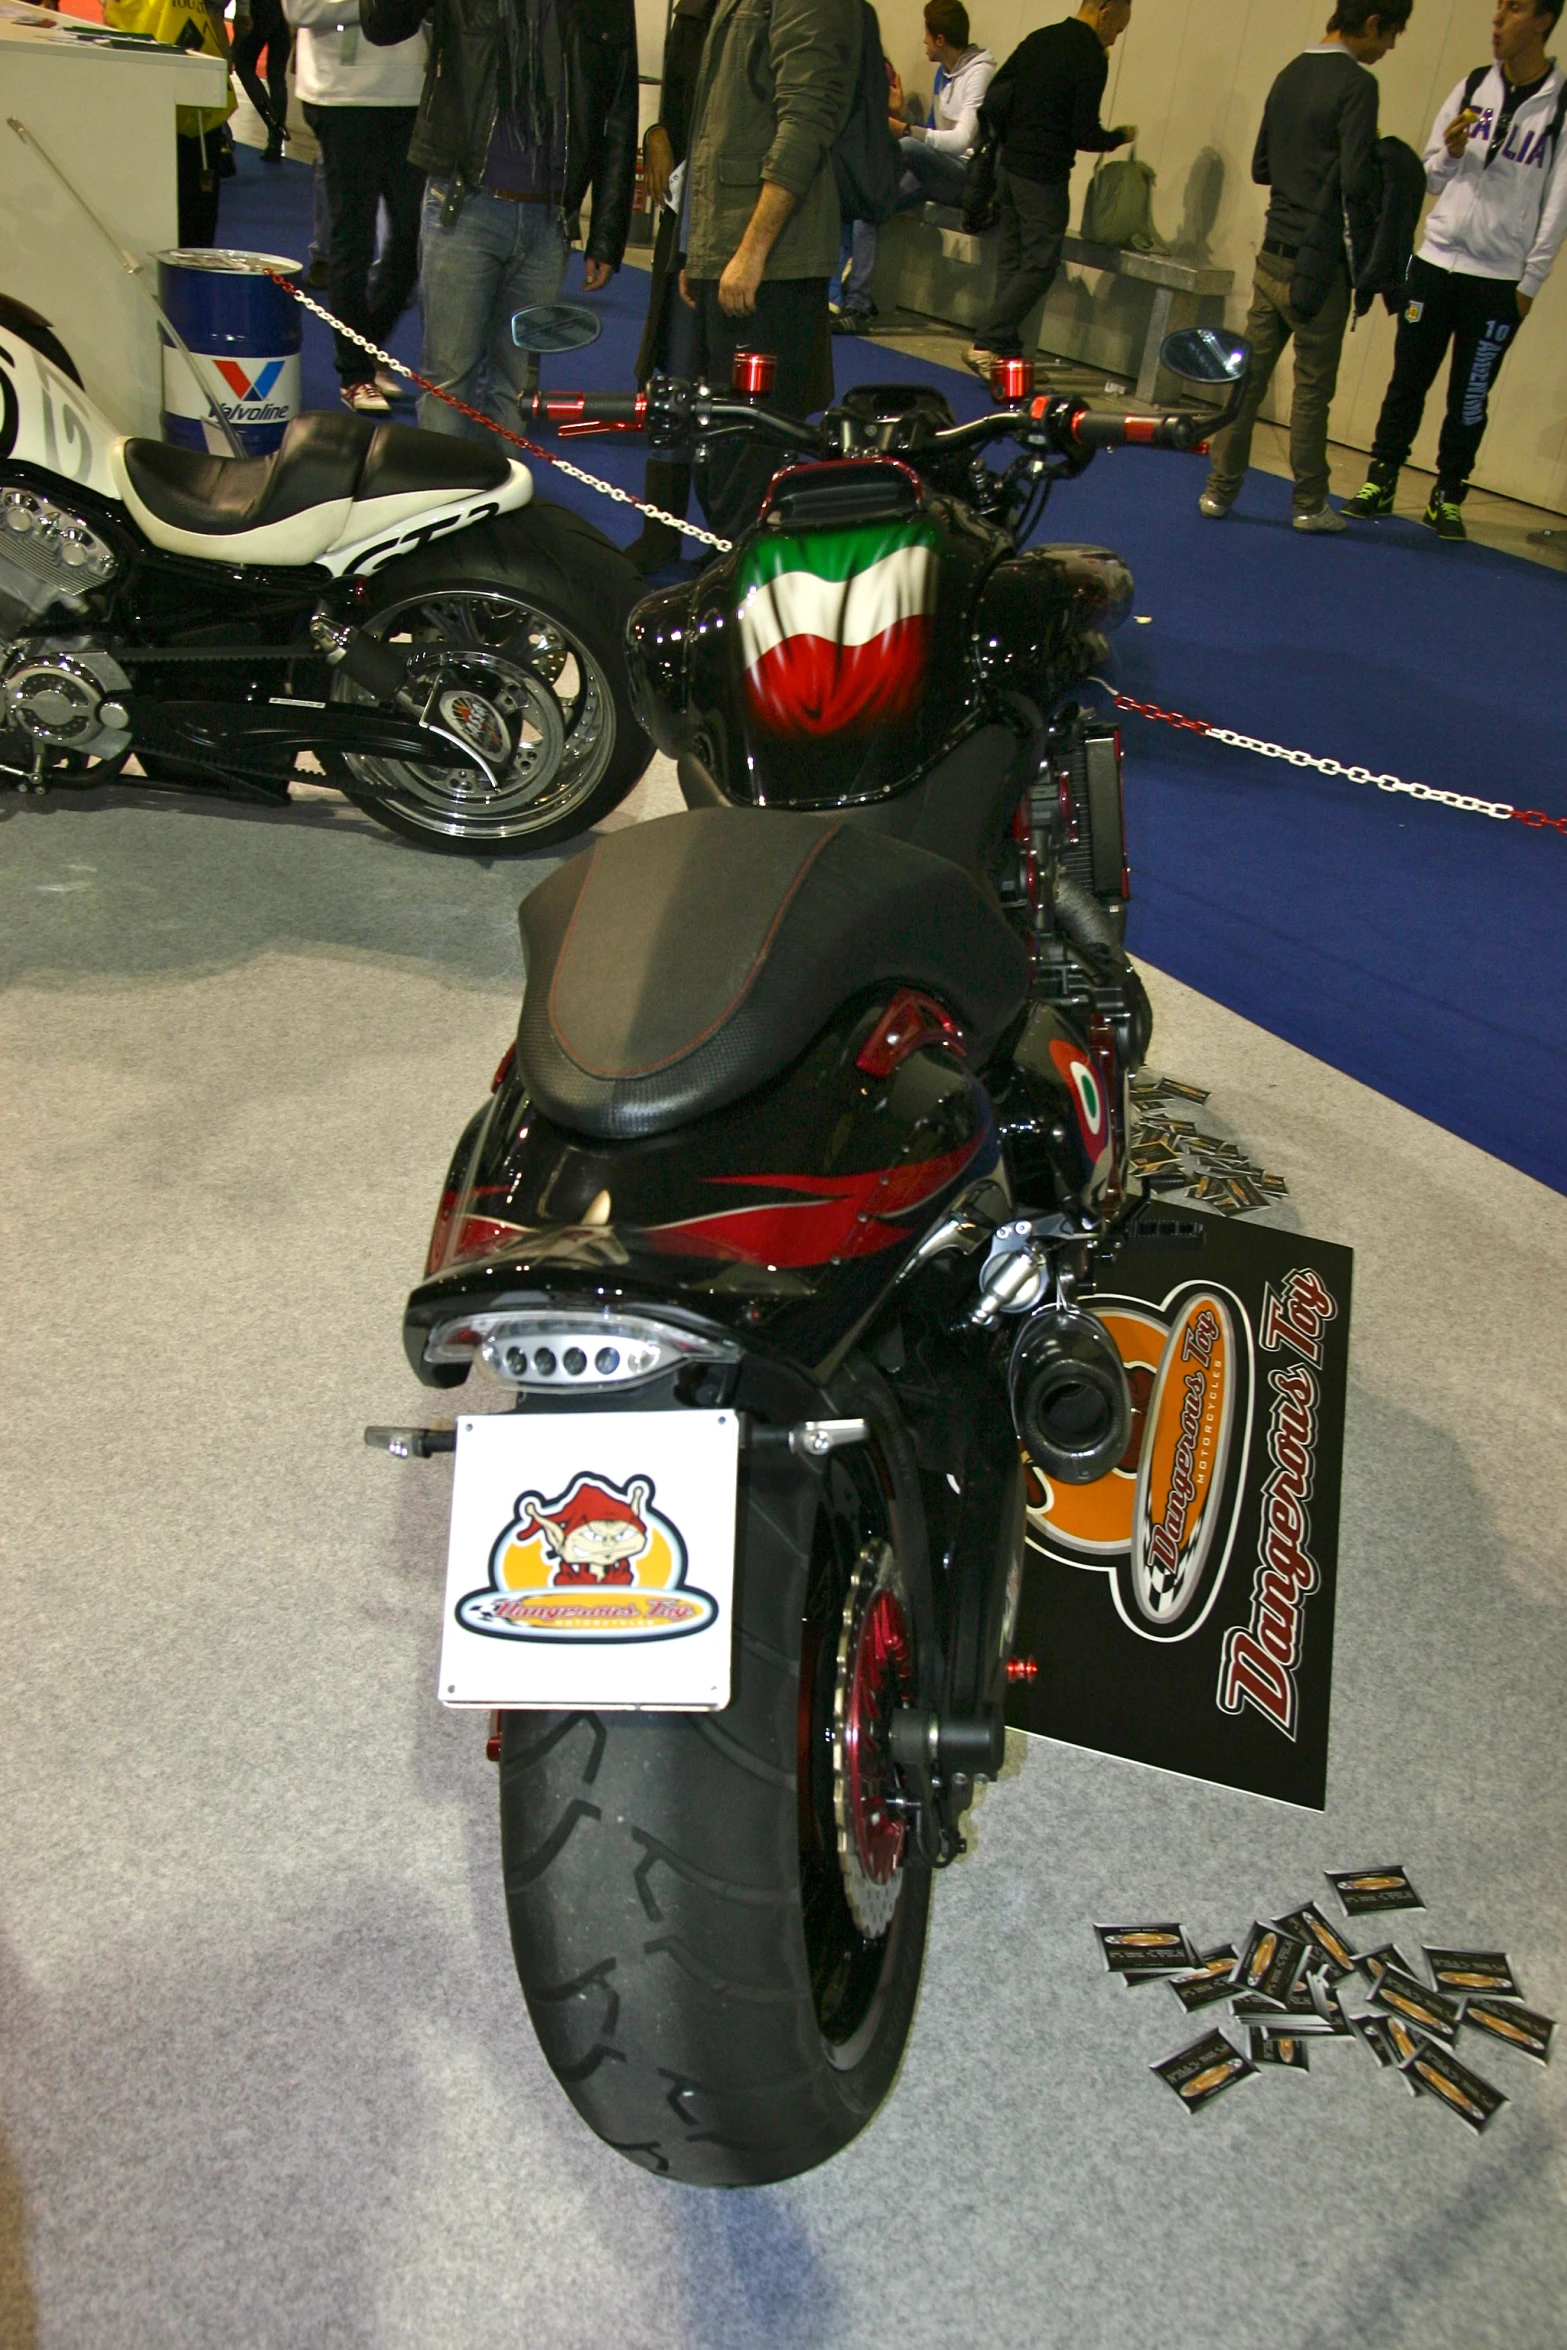 the motor bike is on display for the public to see